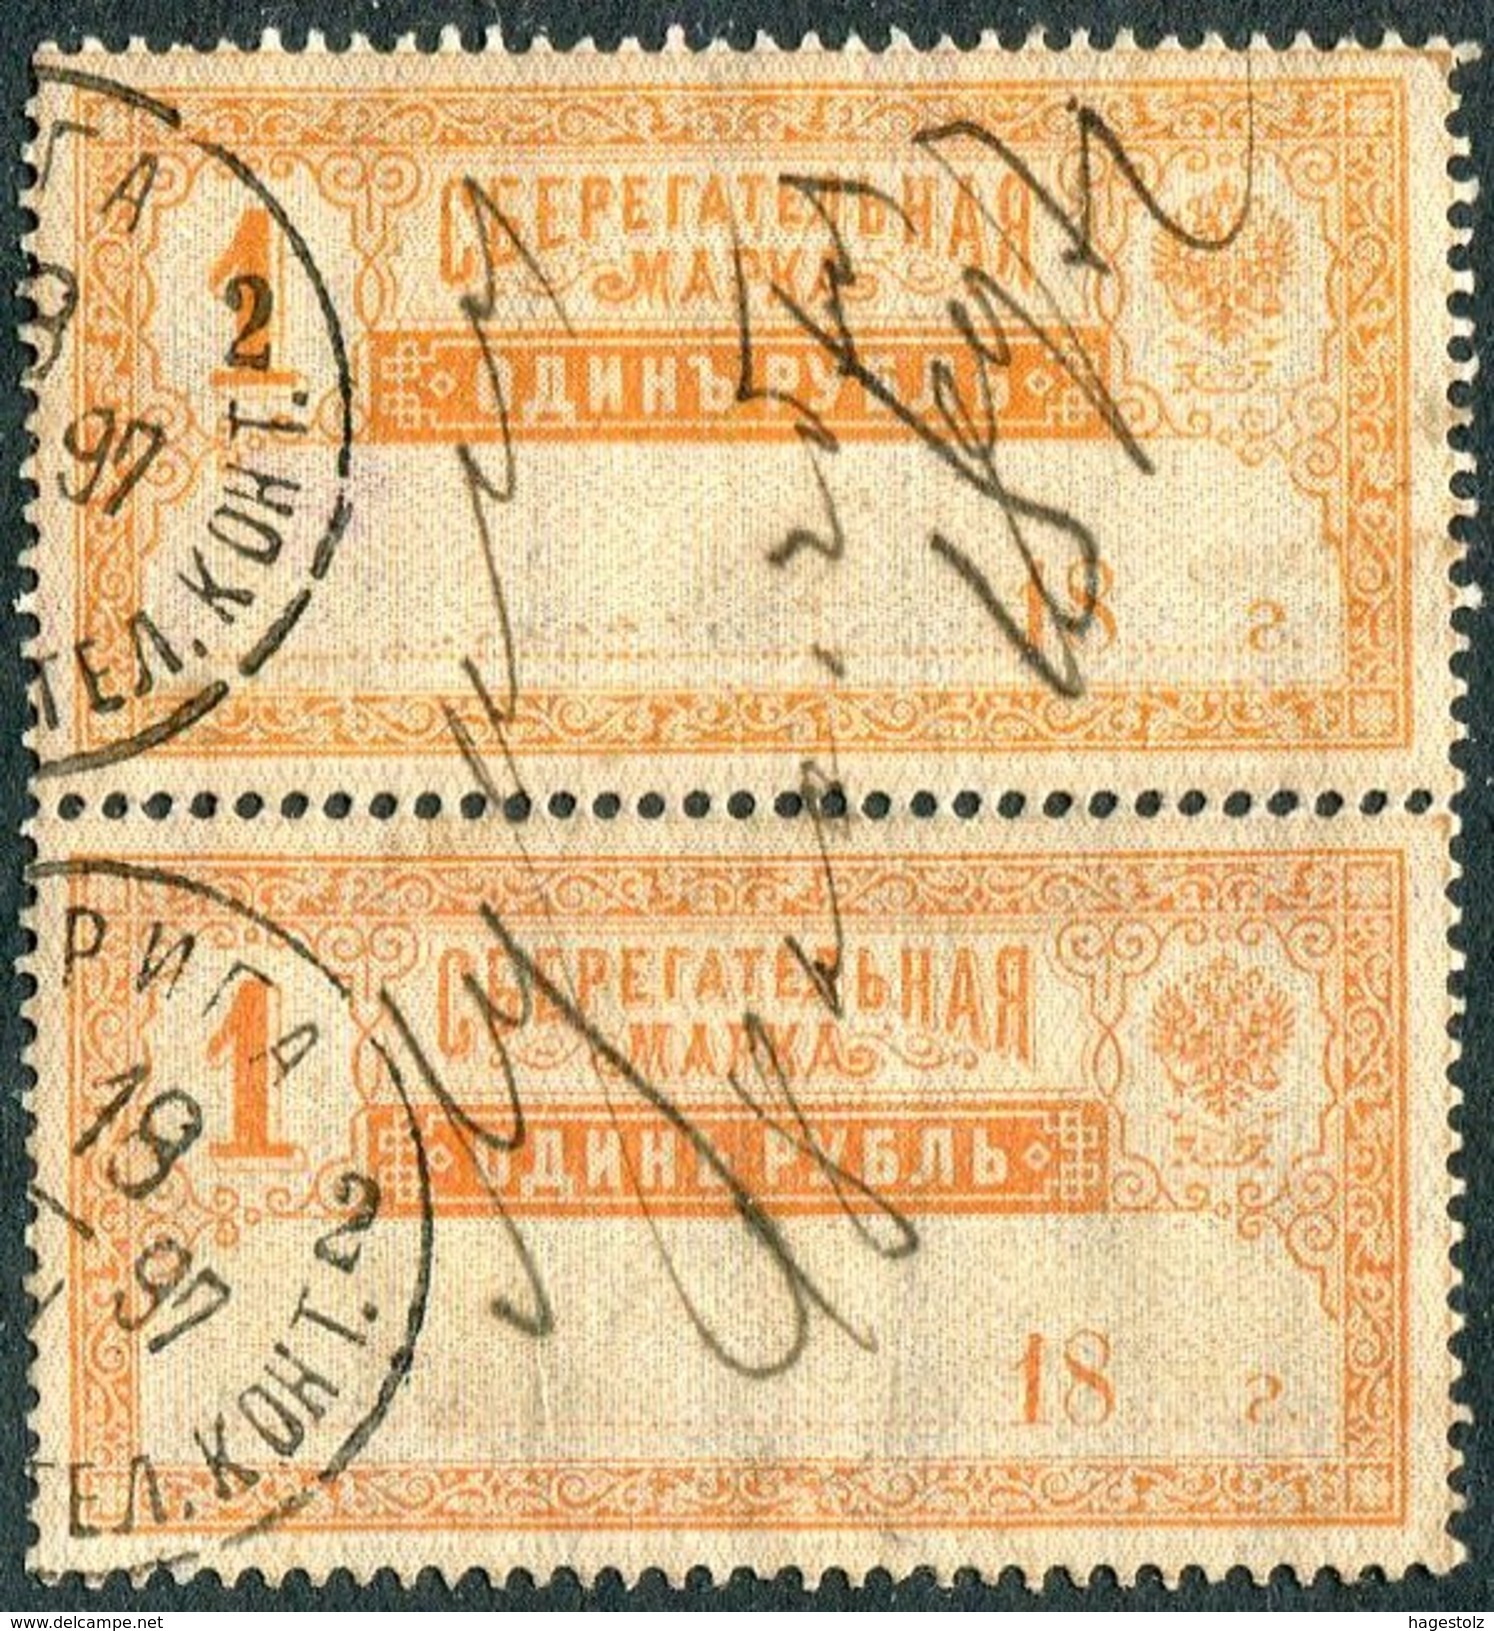 Russia 1890 Postal Savings Revenue 1 Rub. Used In 1897 In Riga Fiscal Sparmarke Timbre D'épargne Russland Russie Latvia - Revenue Stamps